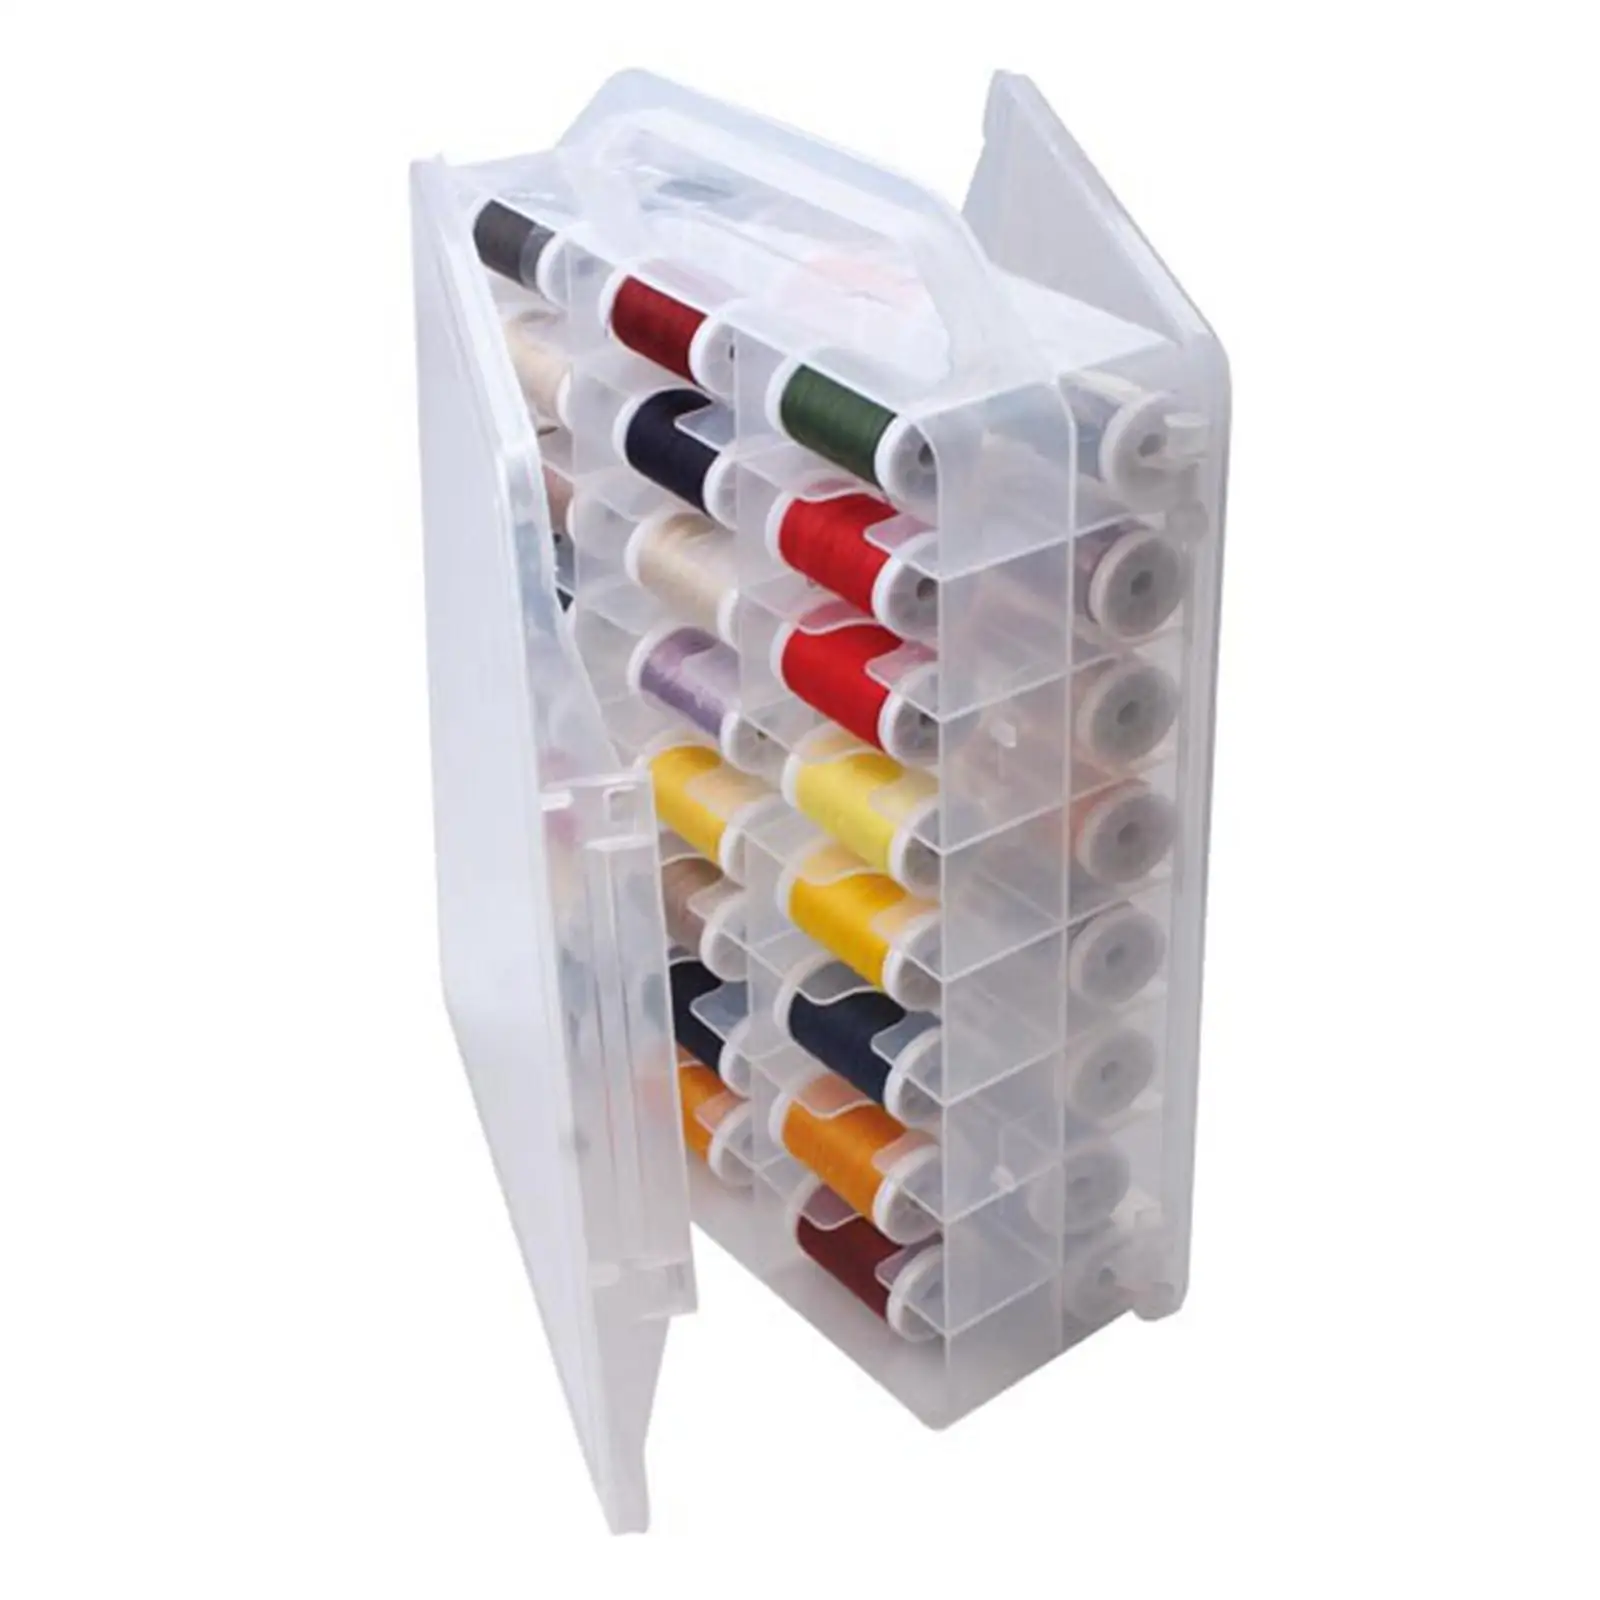 Sewing Thread Holder  Nail Polish Organizer for Crafts Jewelry 